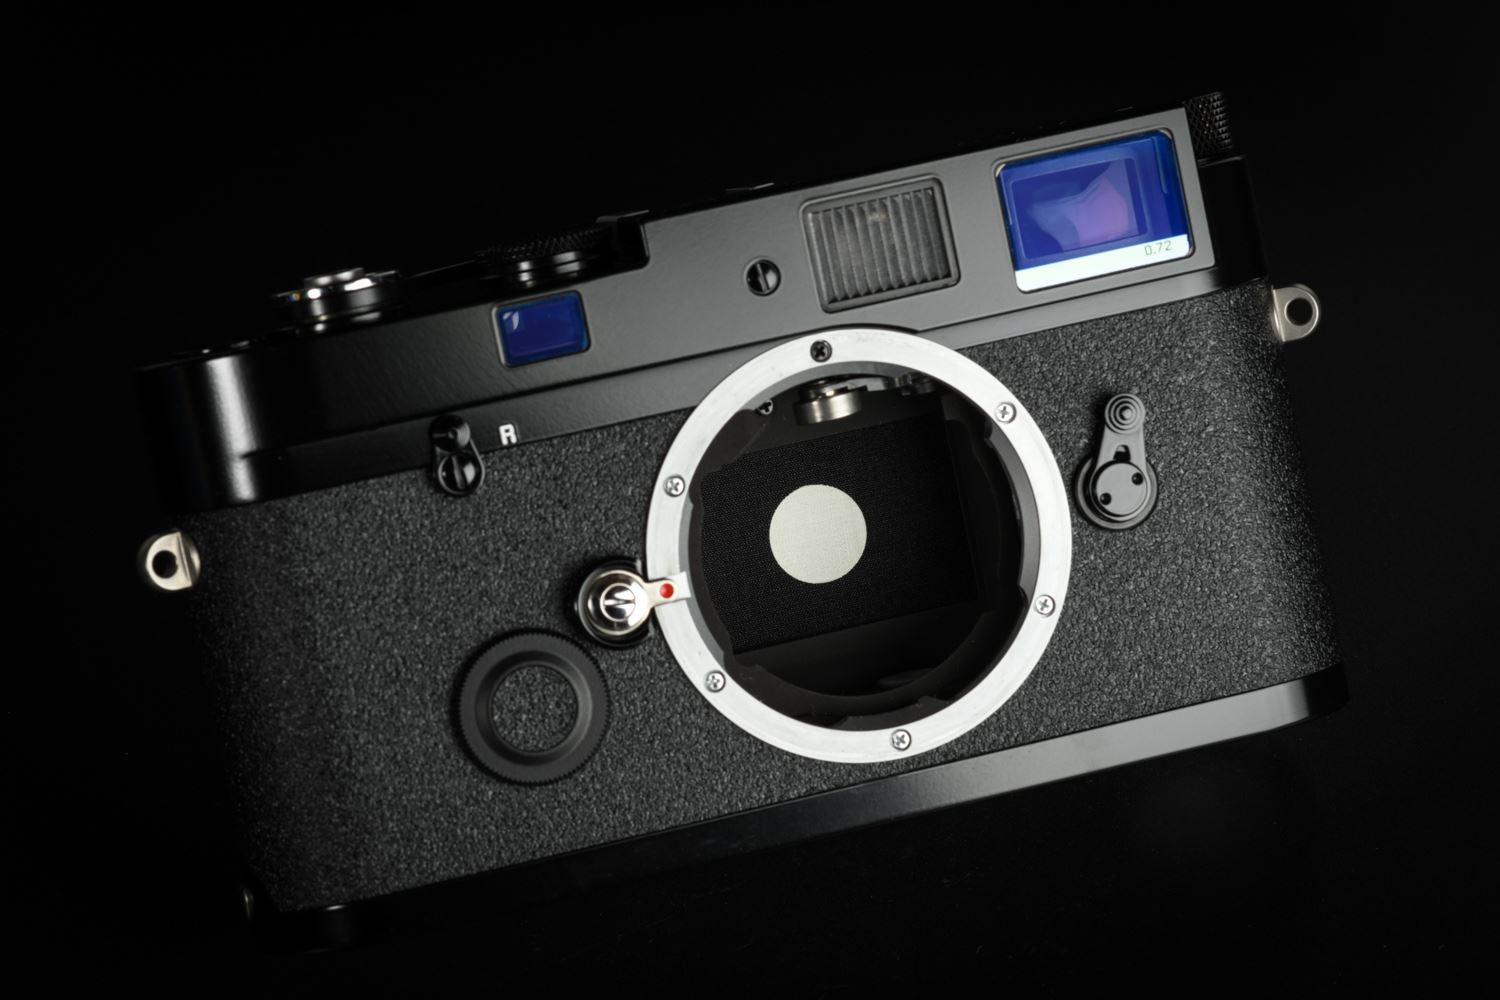 Picture of Leica MP 0.72 Black Paint Betriebsk